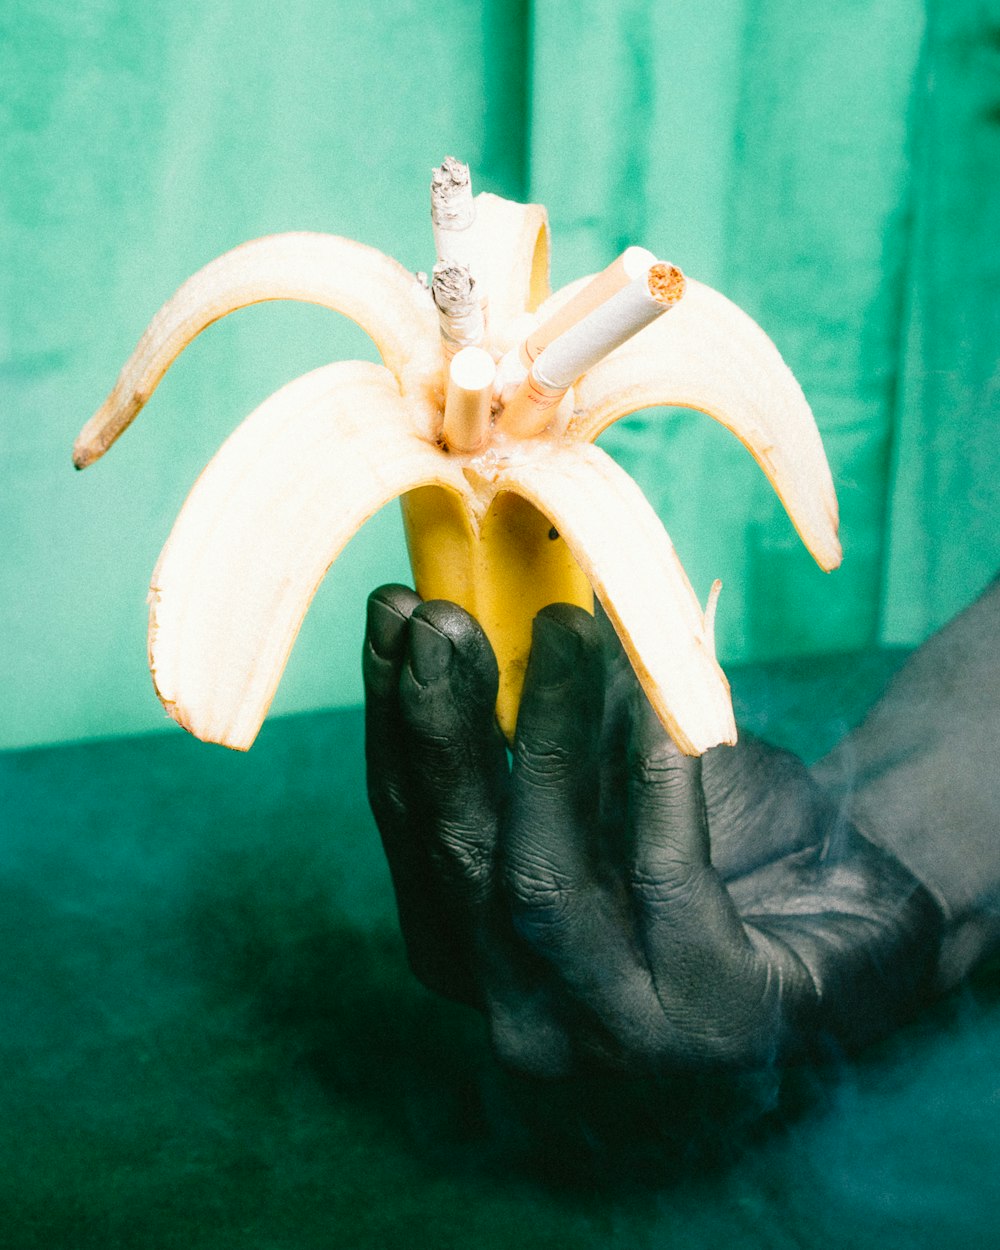 banana peel filled with cigarette butts